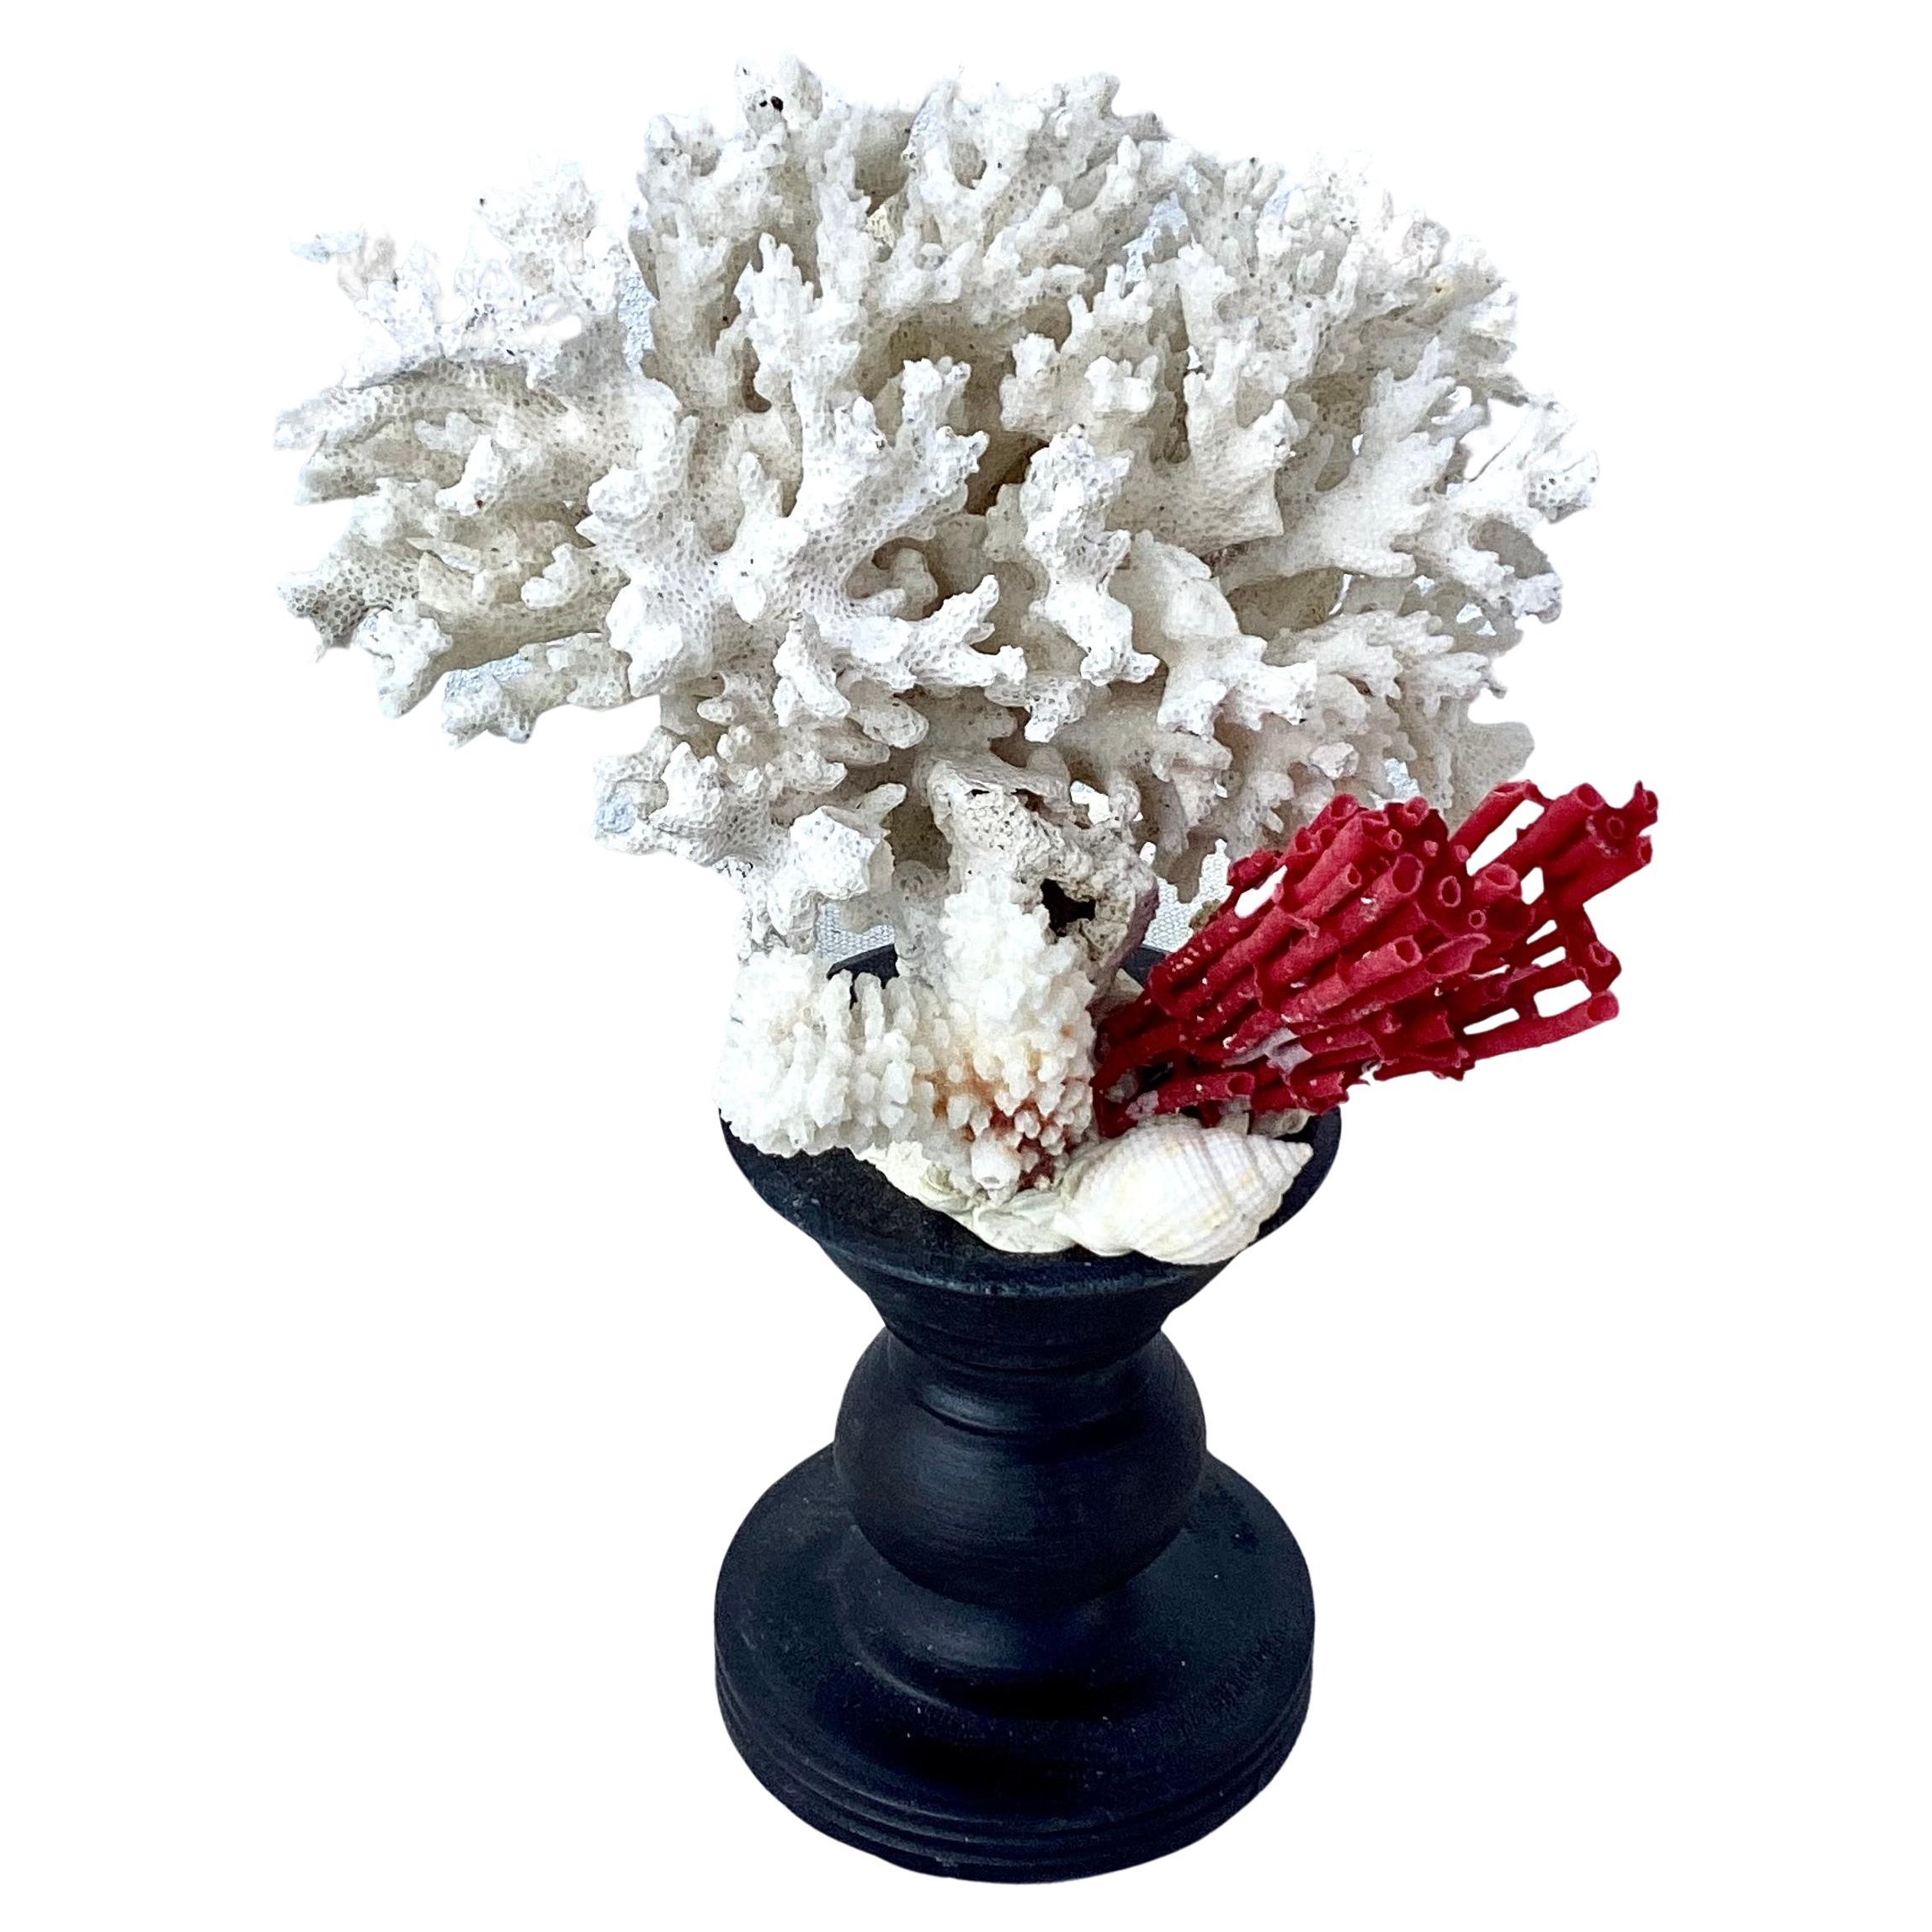 A hand-crafted sculpture specimen of natural white and red coral branches mounted on Black pedestal base.